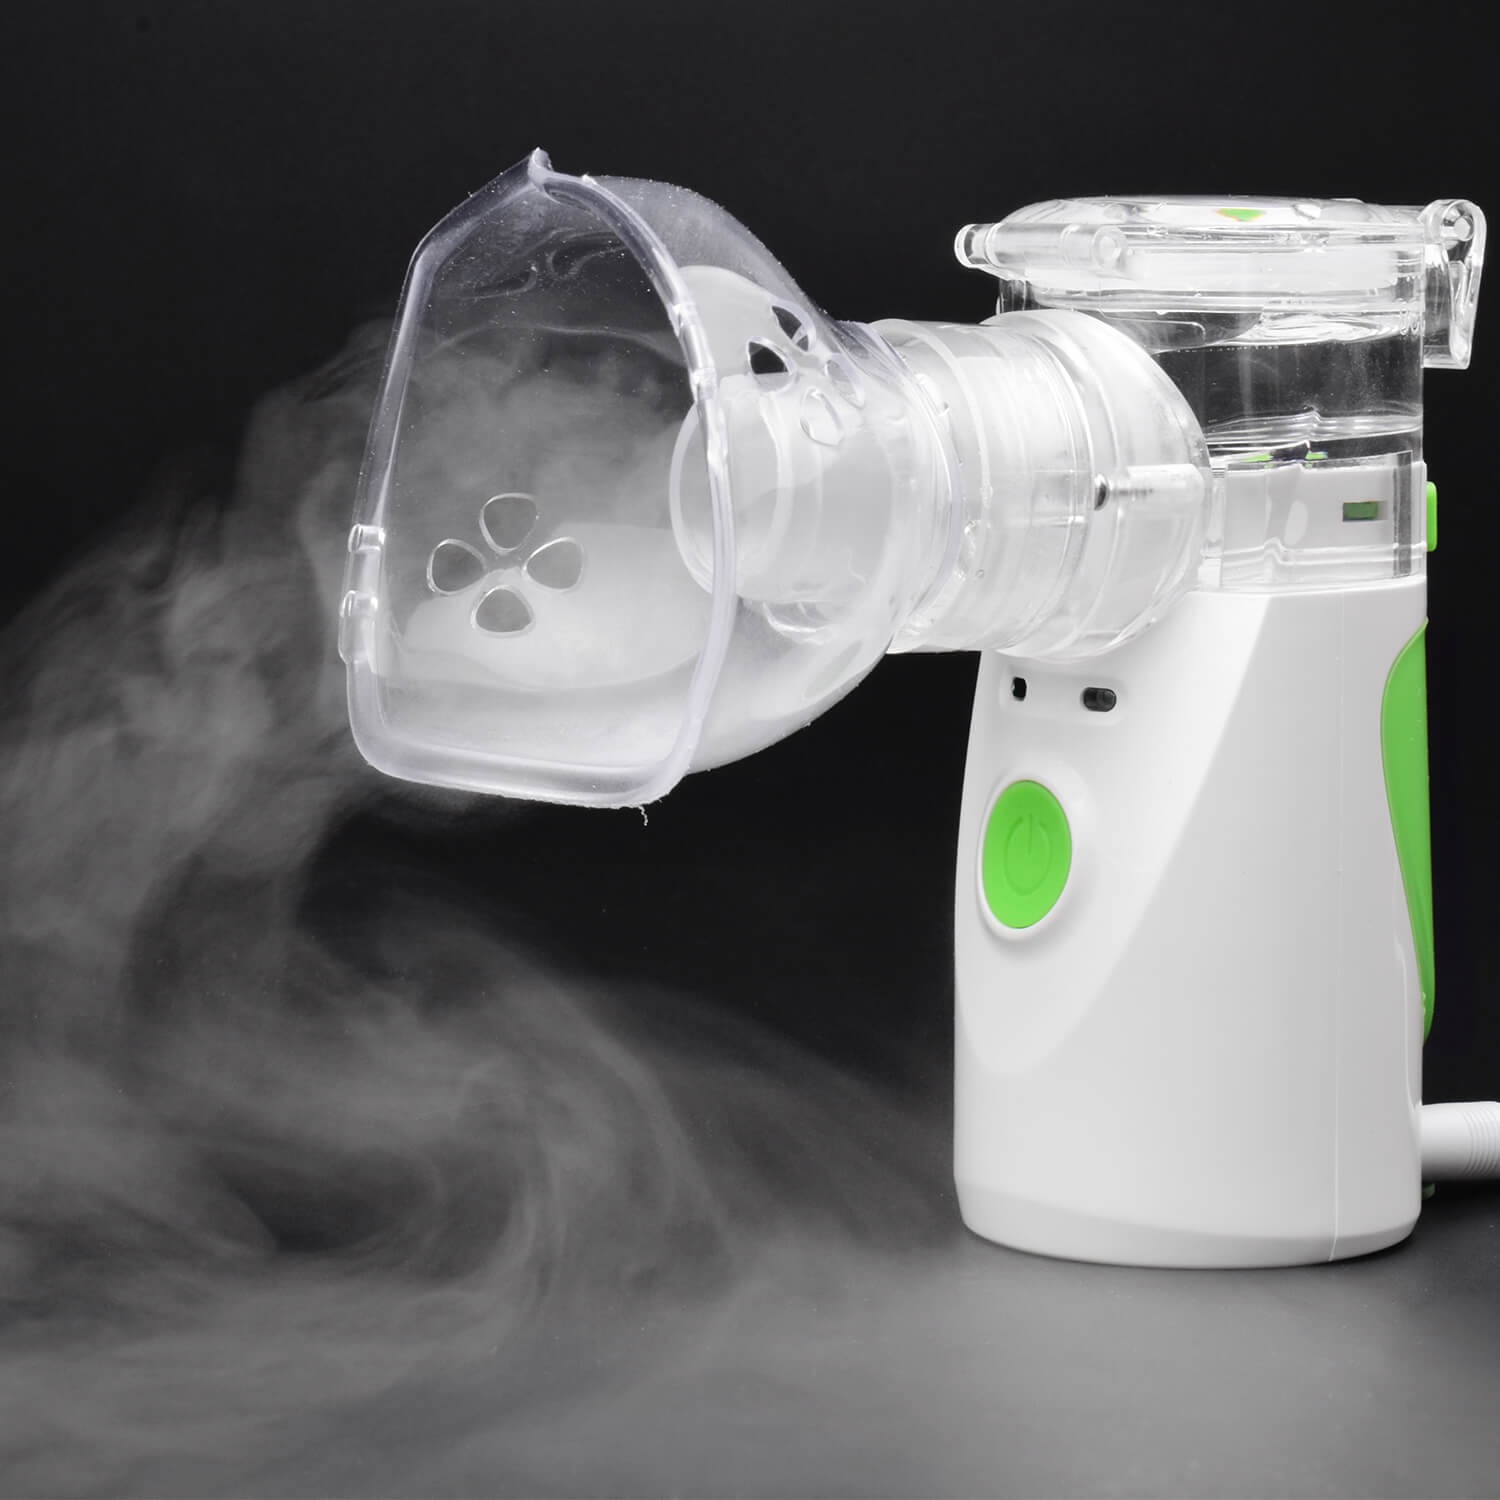 Nebulizer Treatment at Home